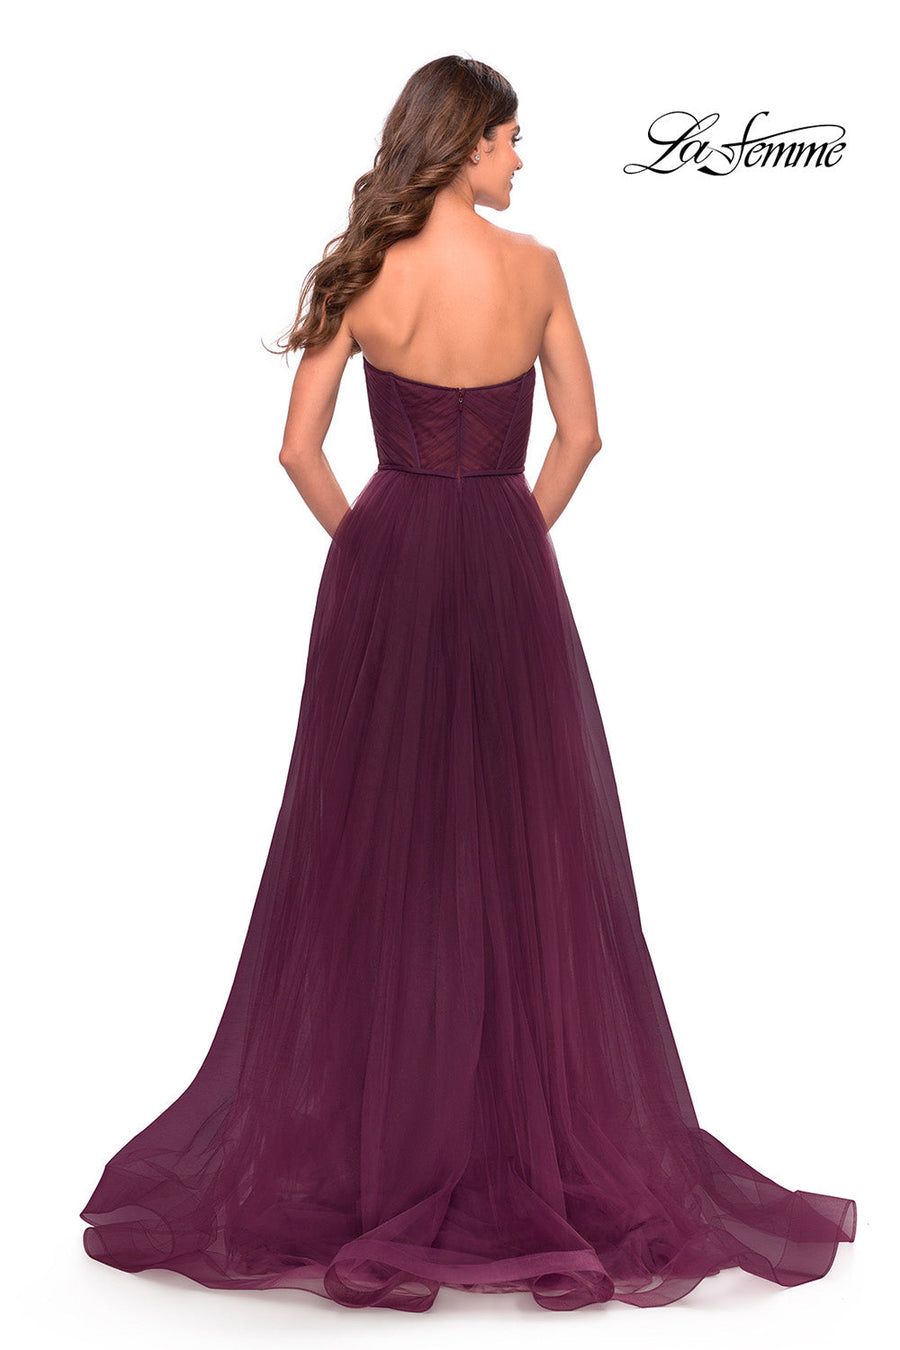 La Femme 31205 prom dress images.  La Femme 31205 is available in these colors: Black, Dark Berry, Dark Emerald.